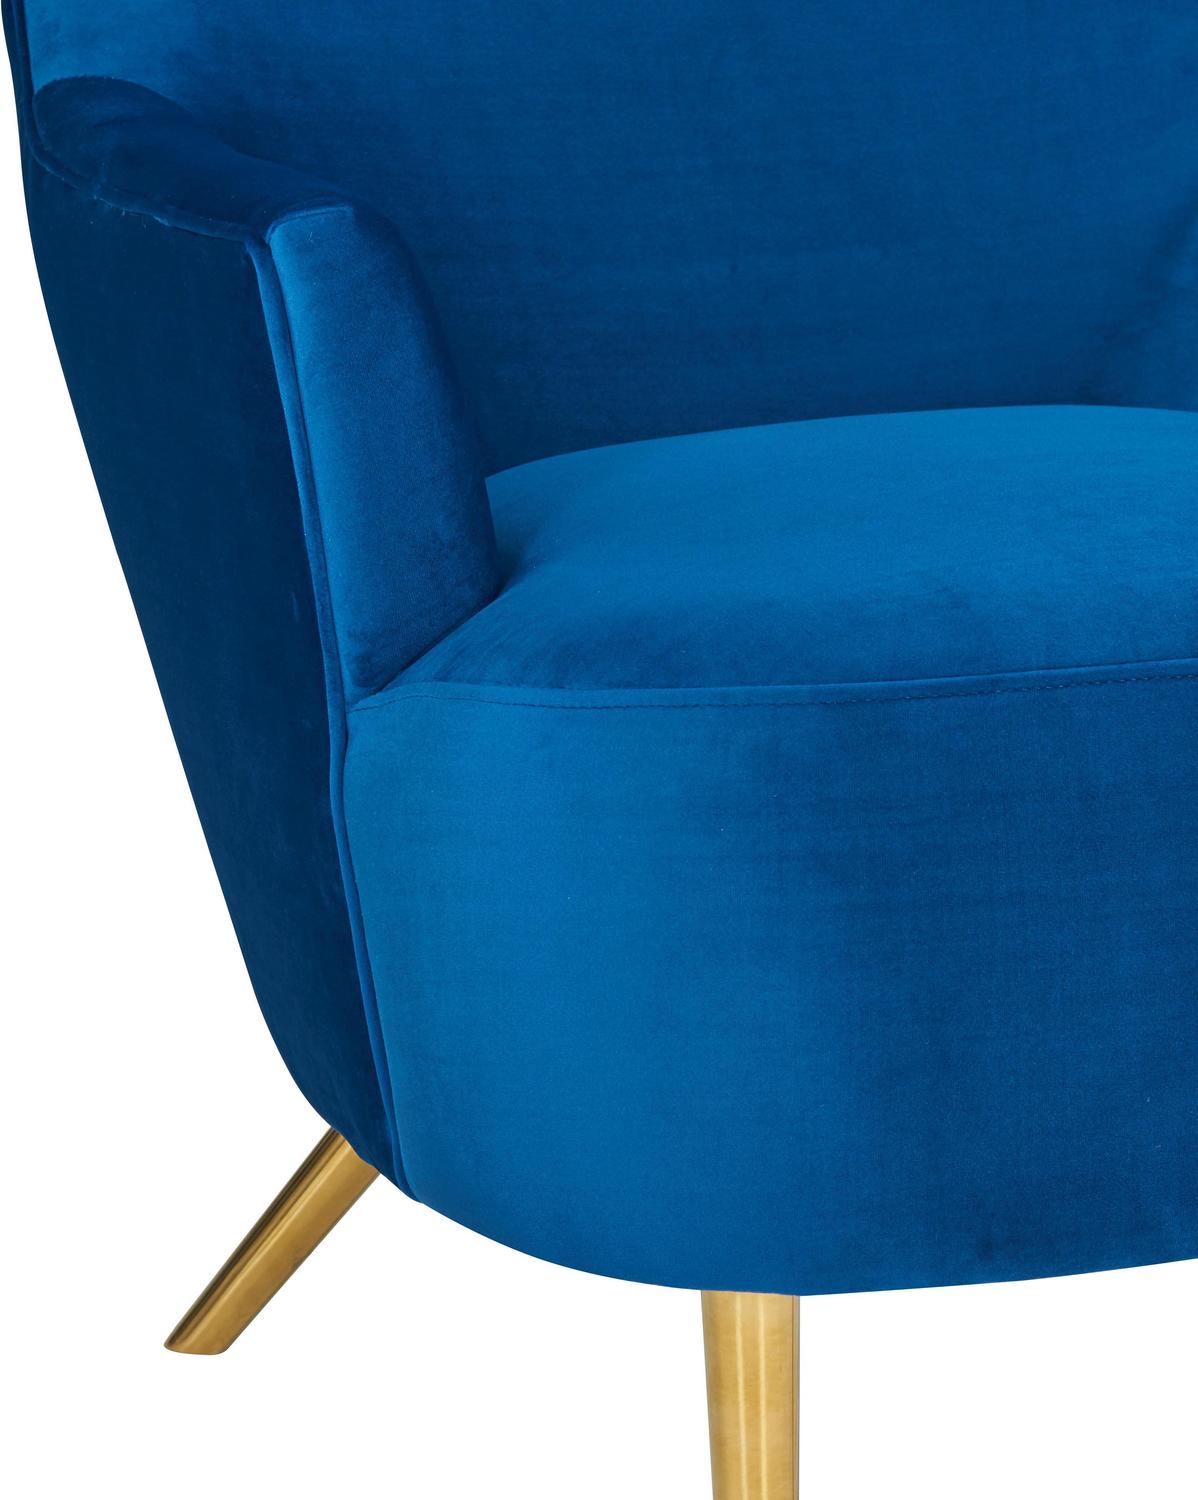 fabric accent chair Tov Furniture Accent Chairs Chairs Navy